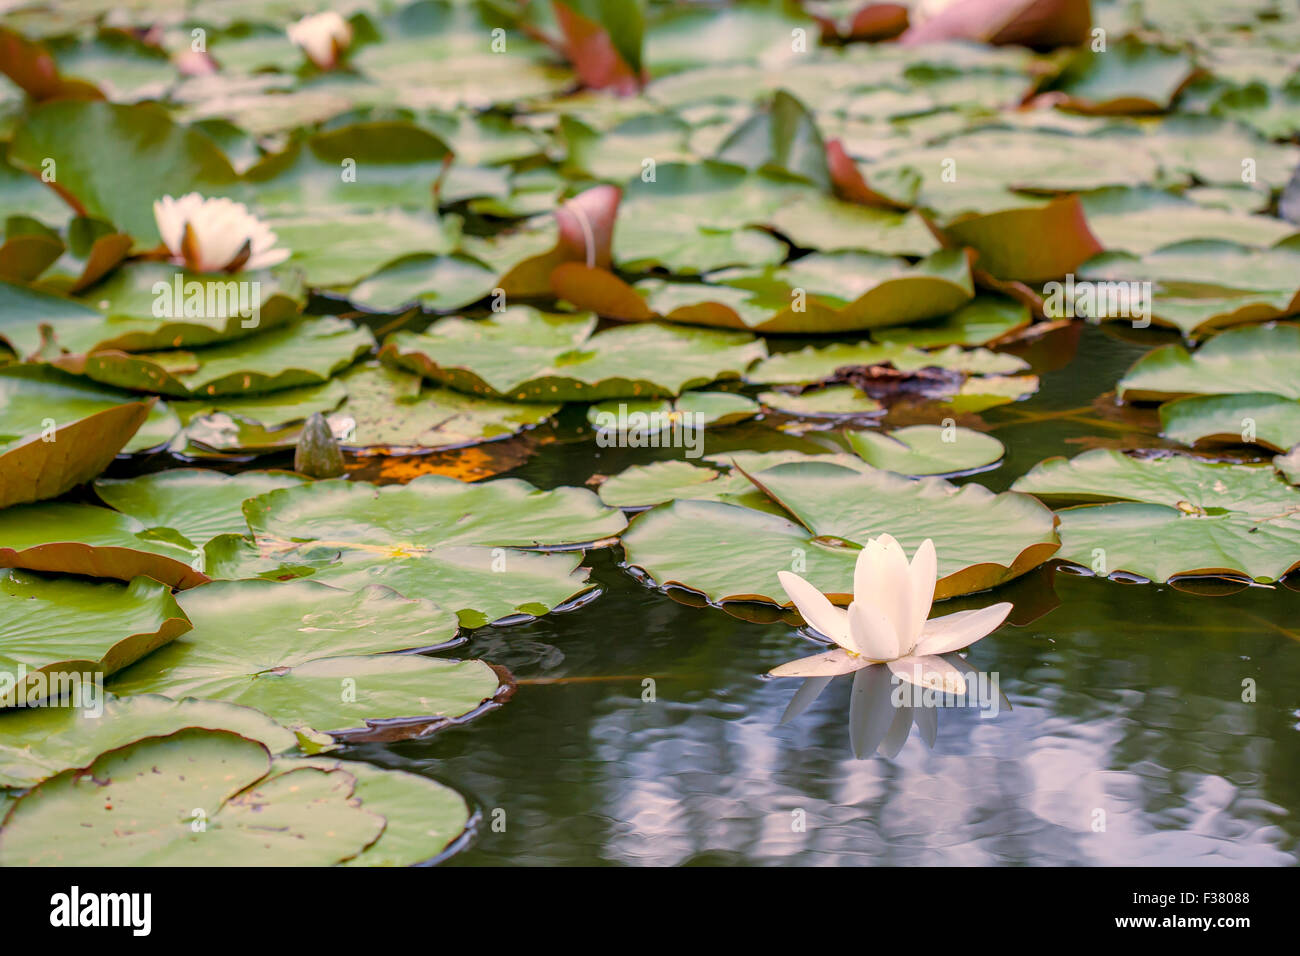 Lotus lake with white water lilly blossoms Stock Photo